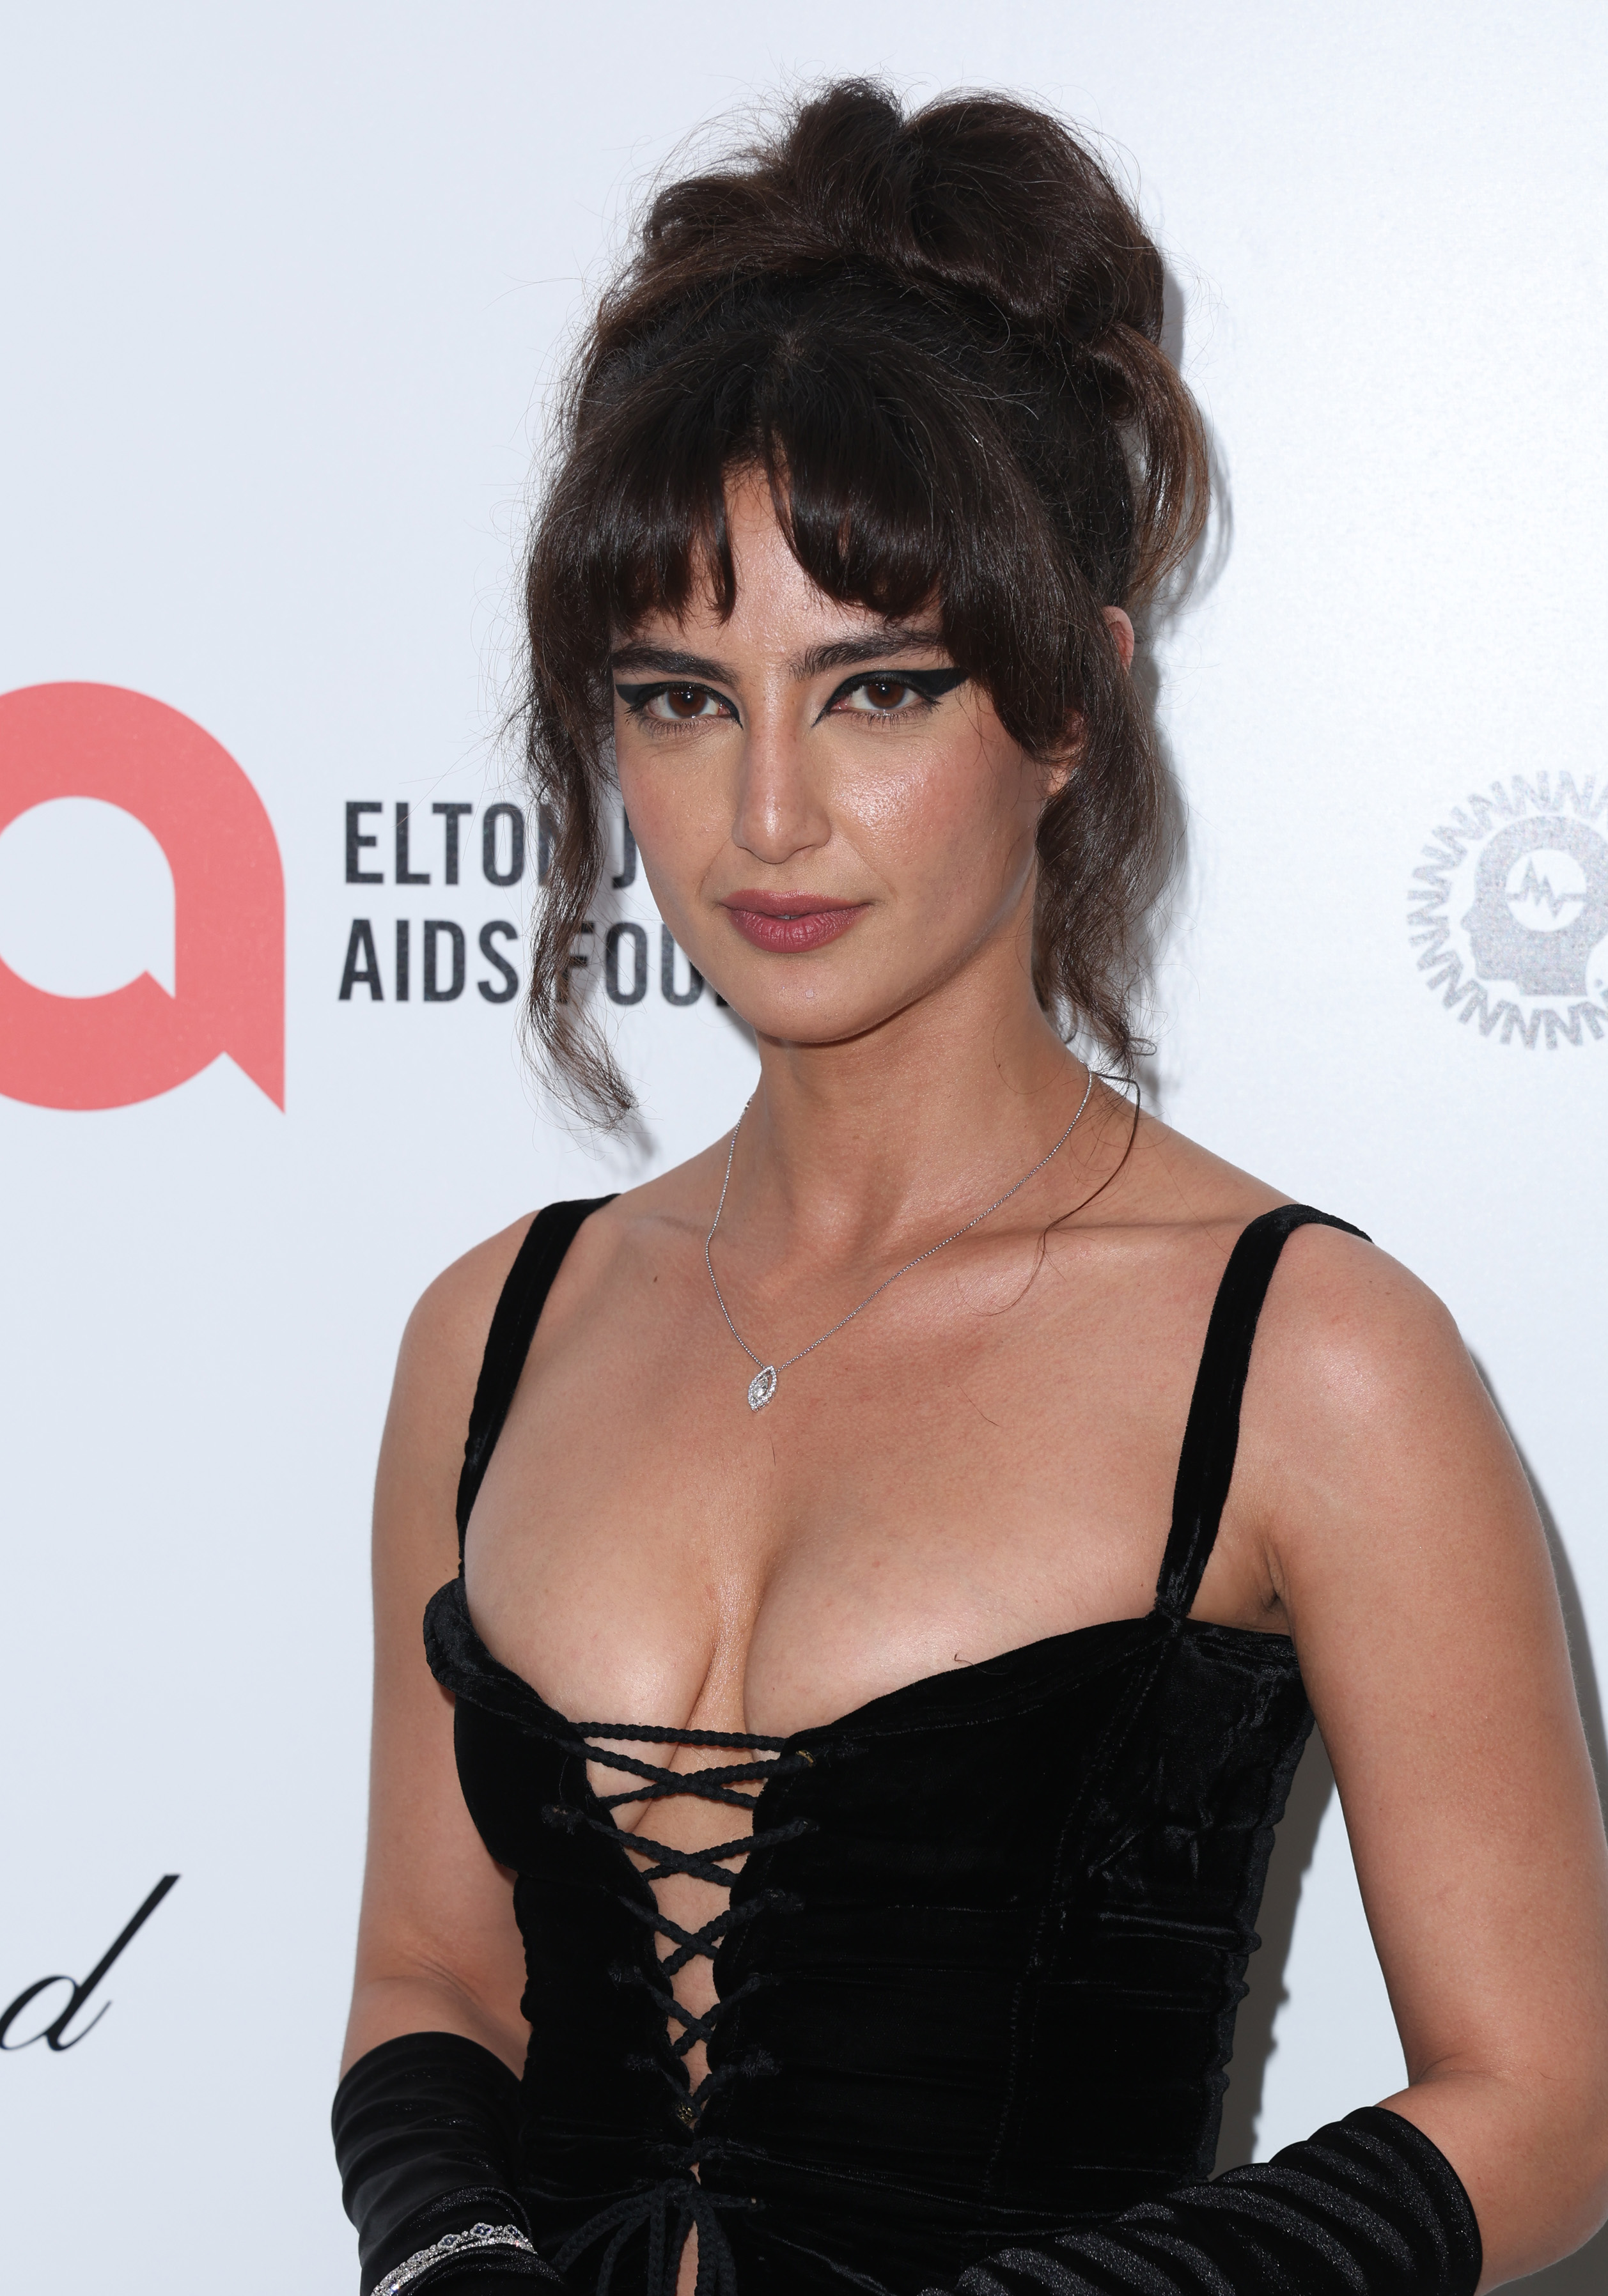 Medalion Rahimi at the Elton John AIDS Foundation's 31st annual academy awards viewing party on March 12, 2023, in West Hollywood, California. | Source: Getty Images